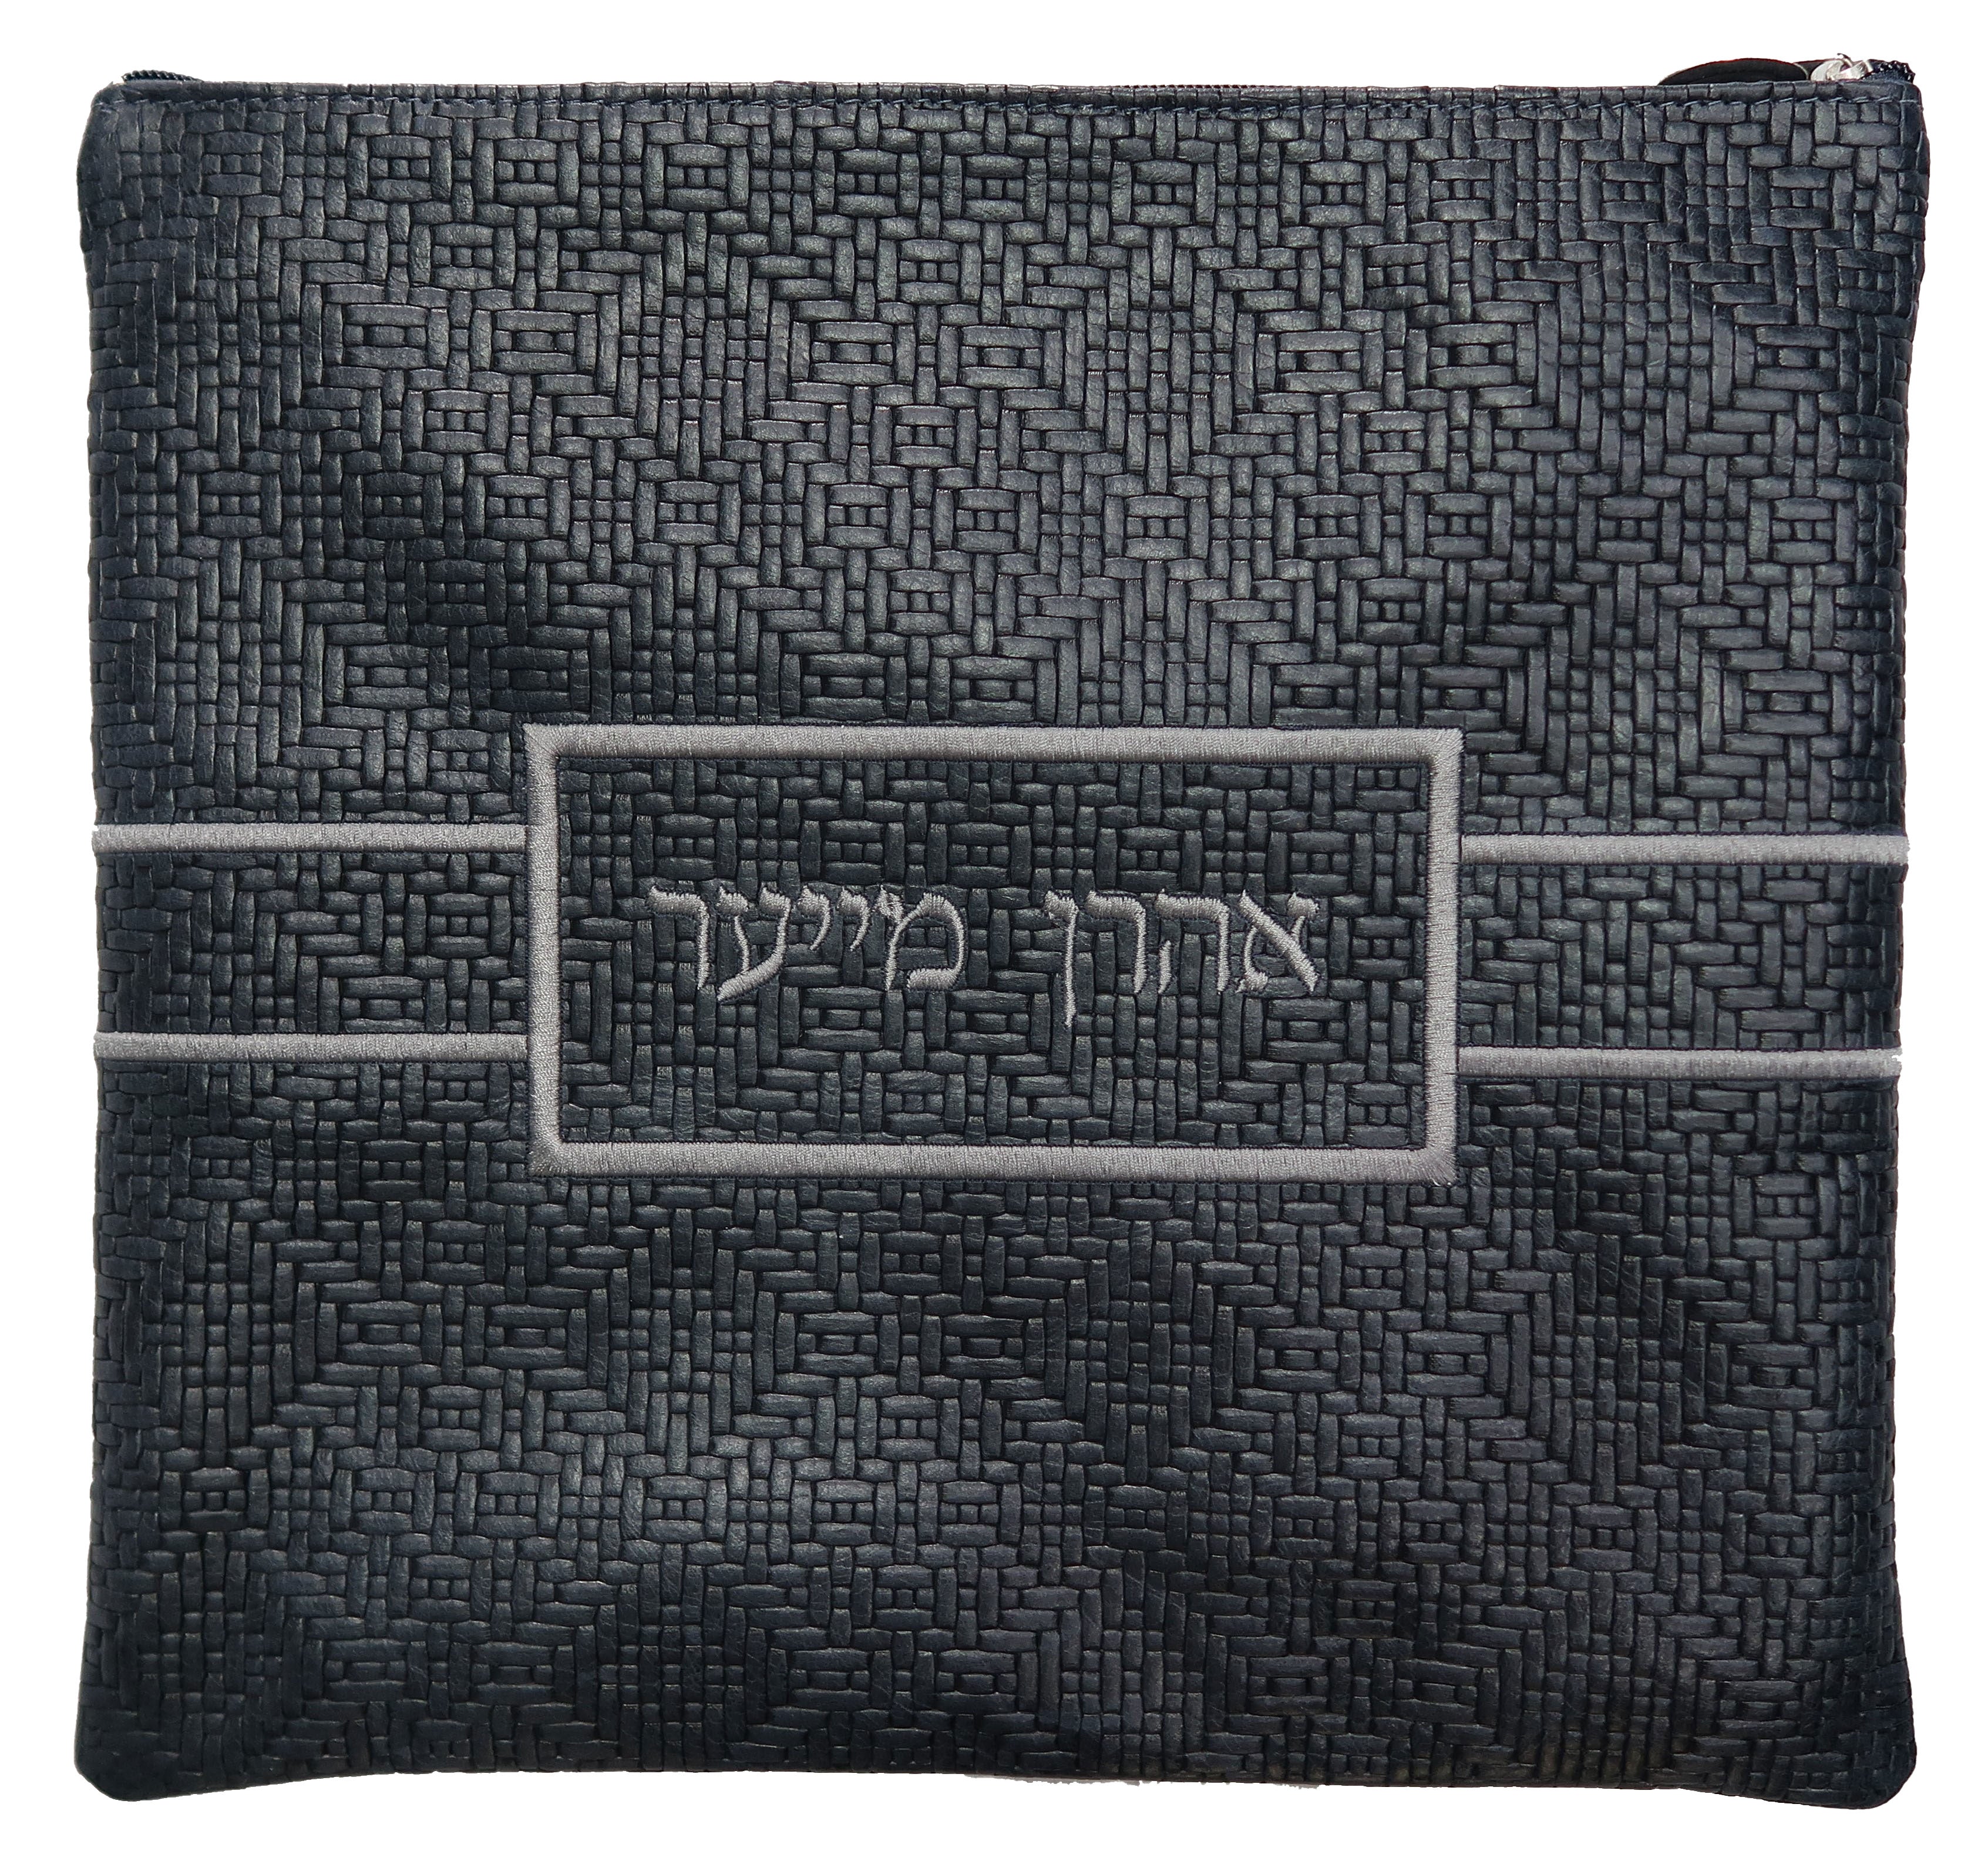 Tallis and Tefillin bag with name label and side strips